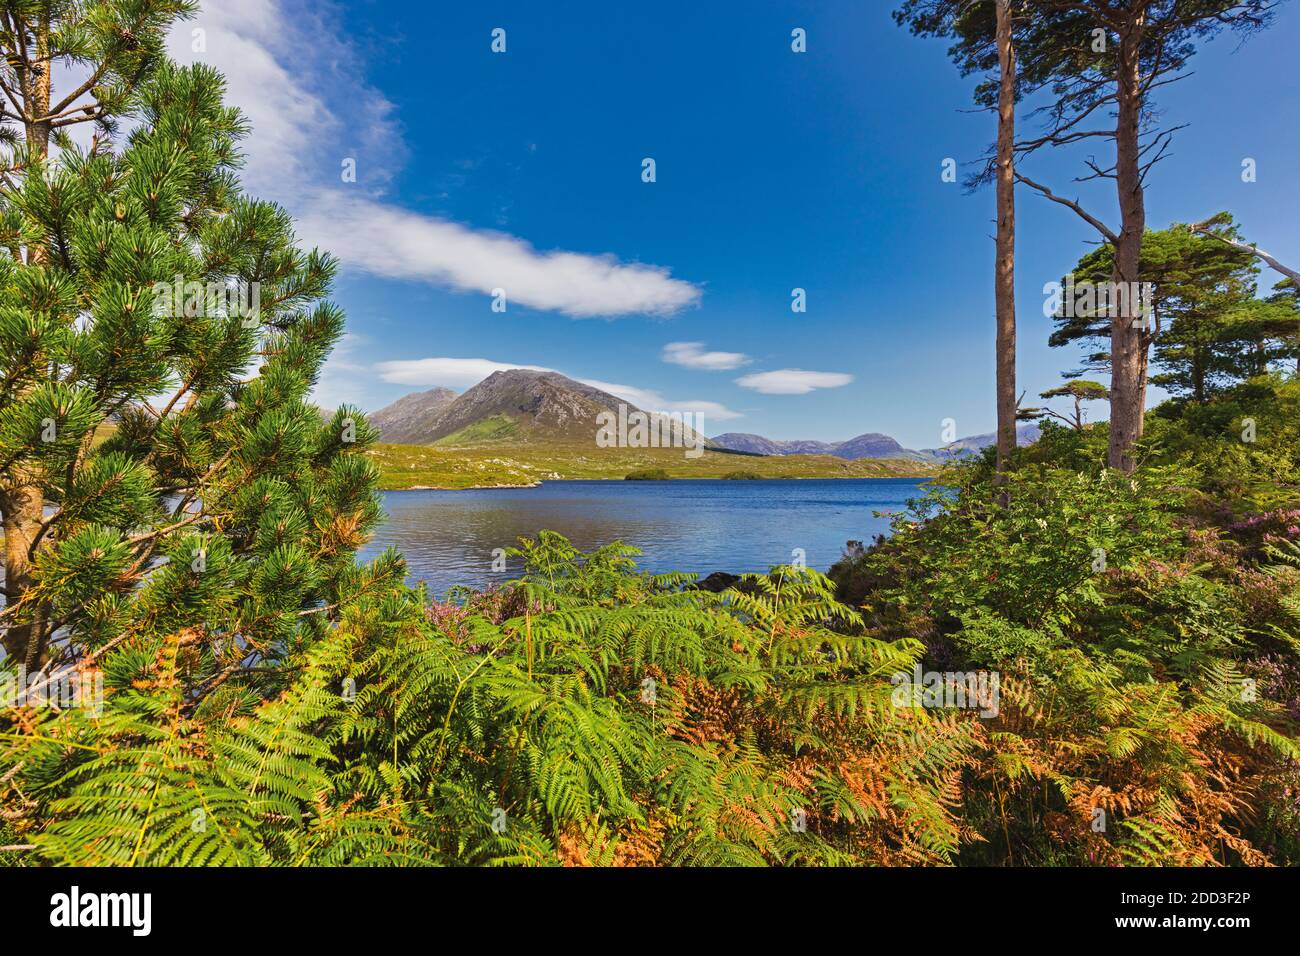 View across Derryclare Lough from Pine Island, Connemara, County Galway, Republic of Ireland. Eire. Stock Photo